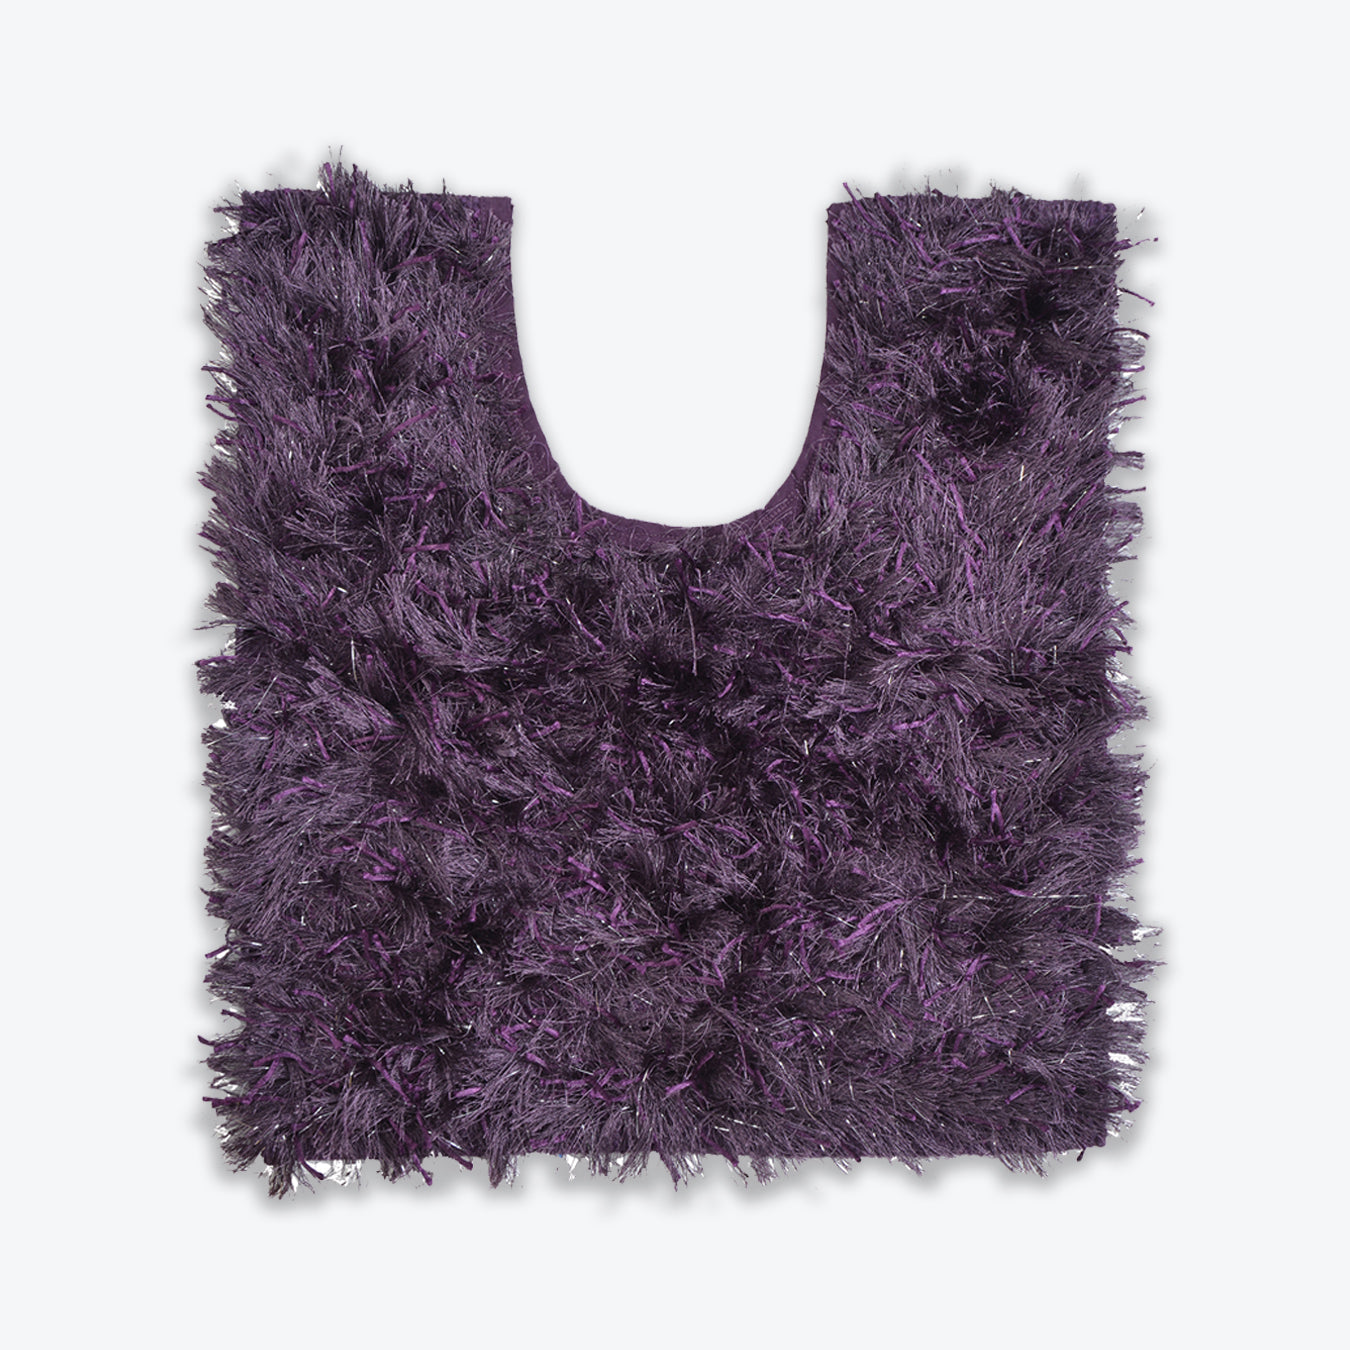 Purple Shaggy Toilet Mat With Glam Sparkle Accents